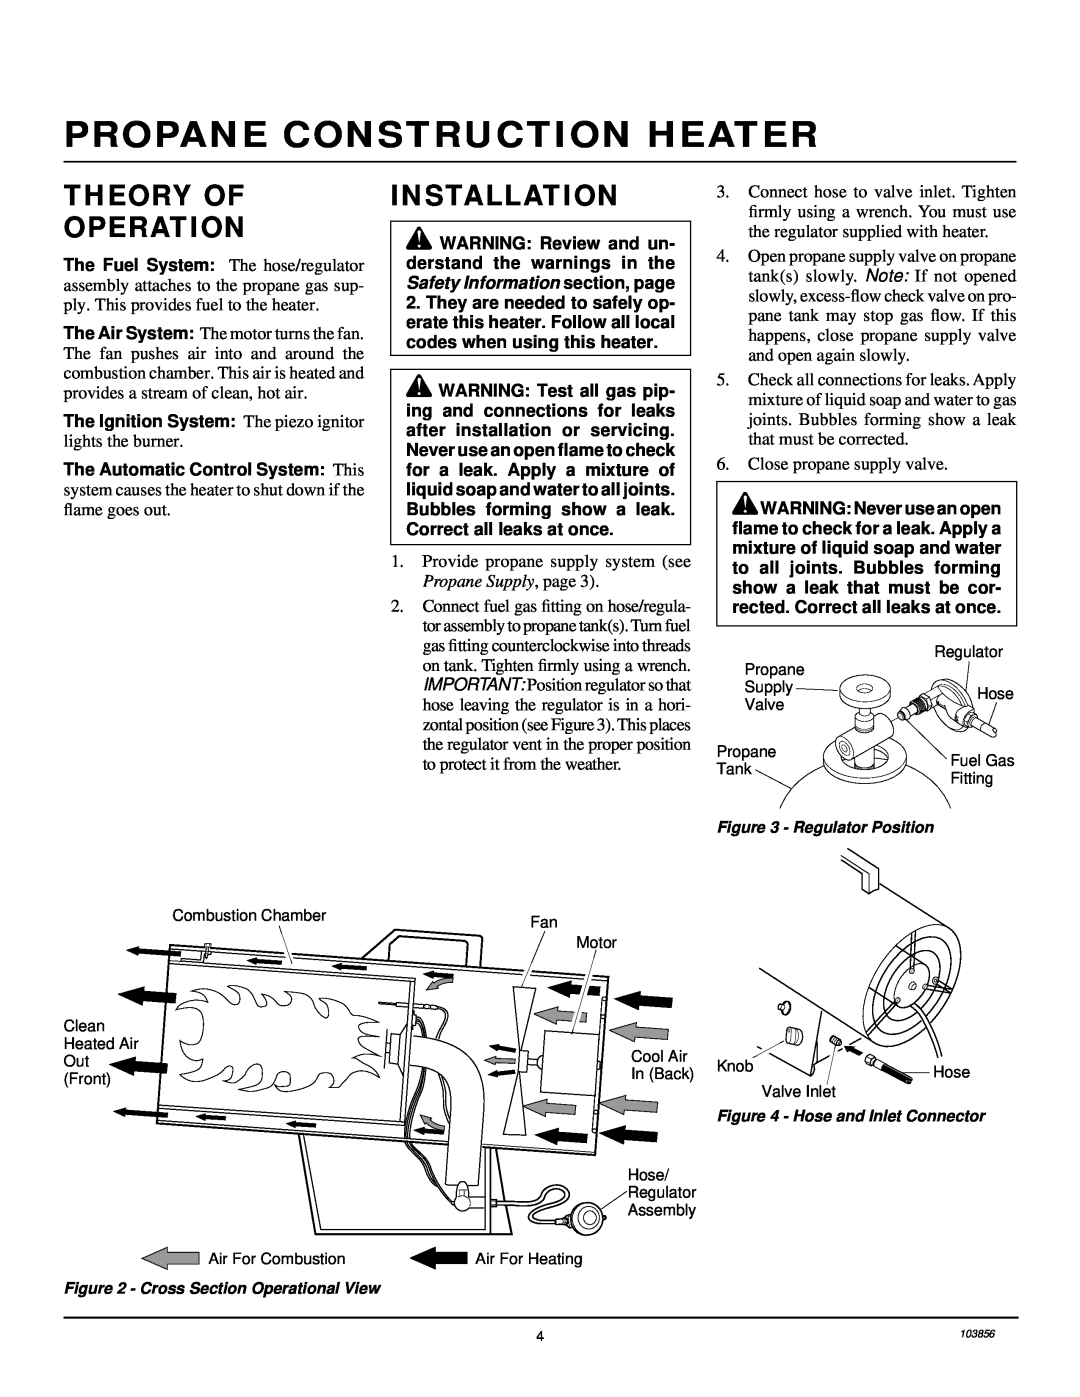 Desa RCLP50V owner manual Theory Of Operation, Installation, Propane Construction Heater 